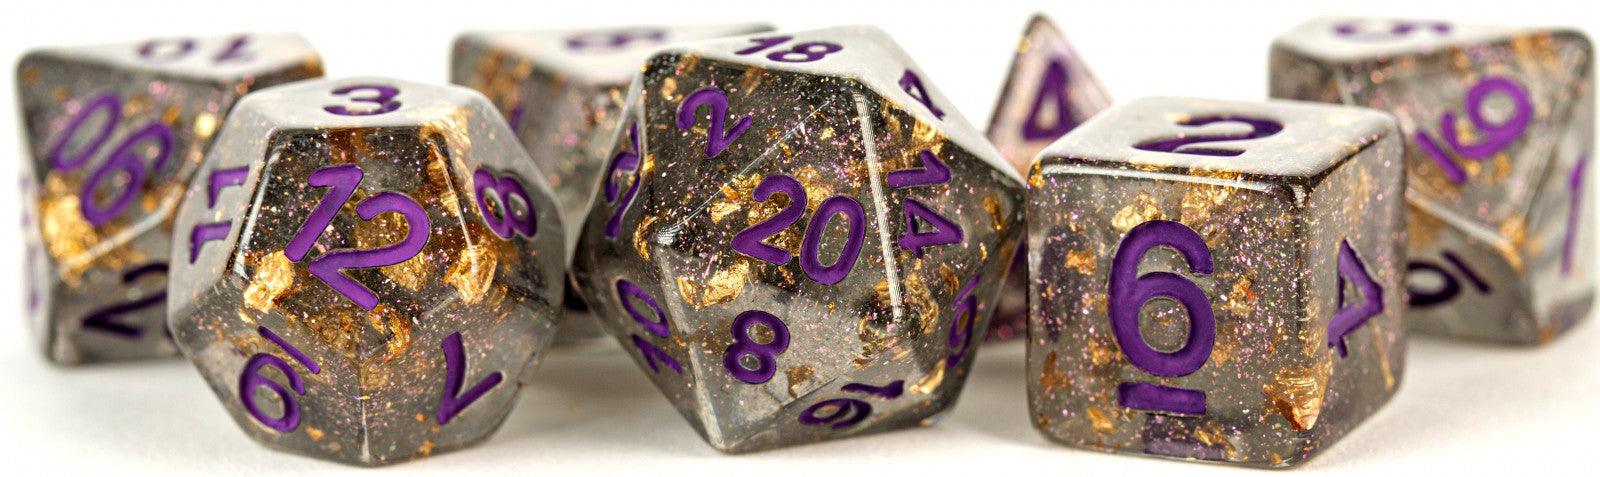 VR-72687 MDG Digital Resin Dice Set 16mm - Gray with Gold Foil, Purple Numbers - FanRoll by Metallic Dice Games - Titan Pop Culture